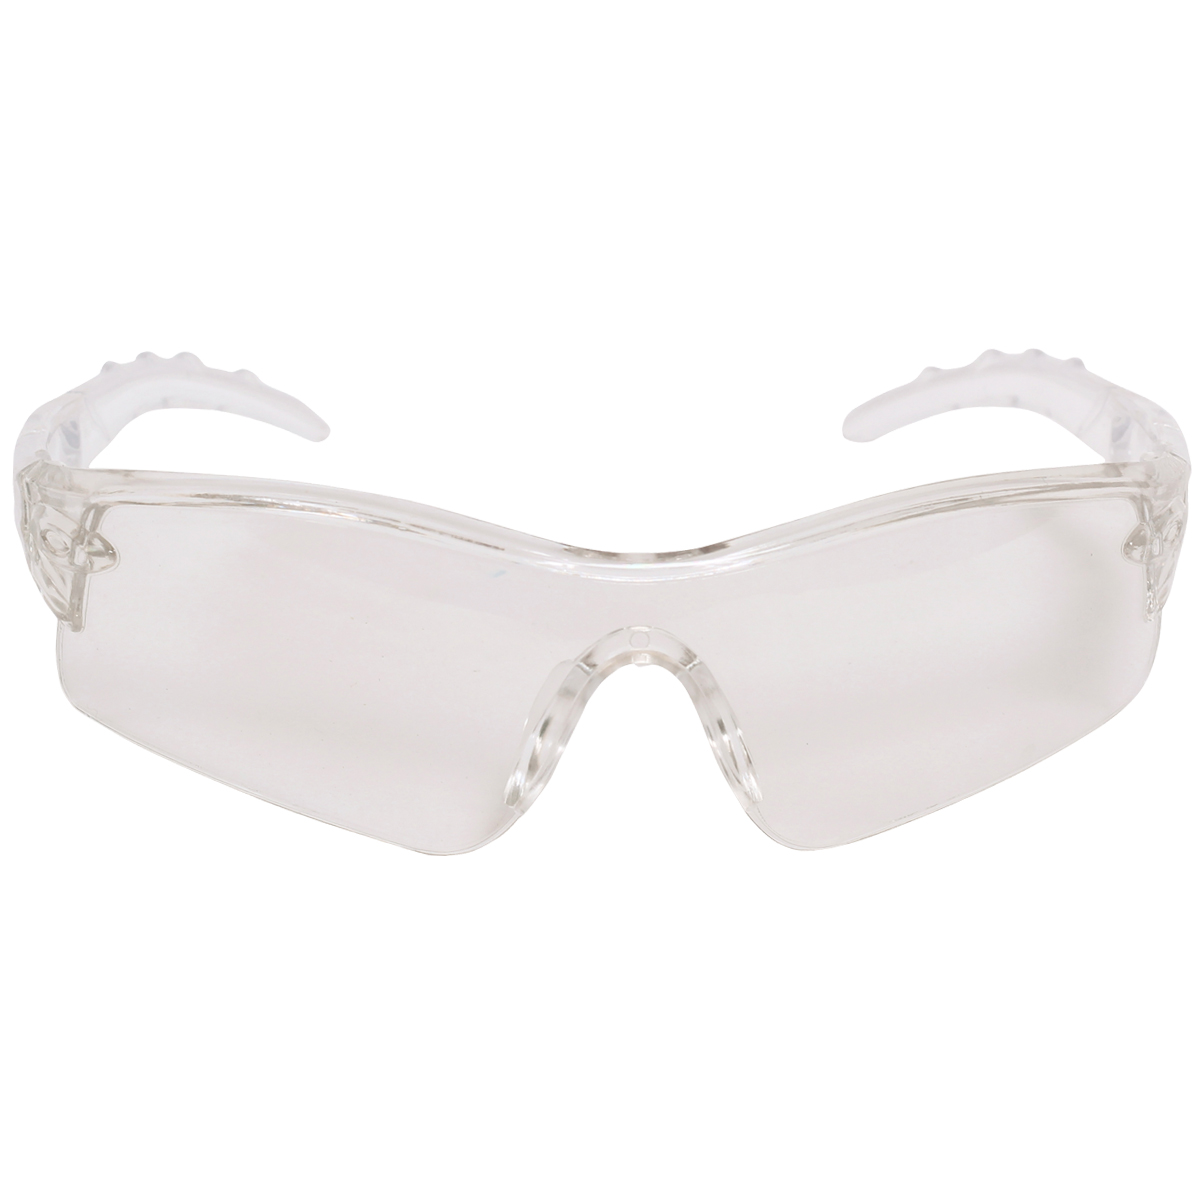 Clear Day Night Driving Sunglasses Goggles